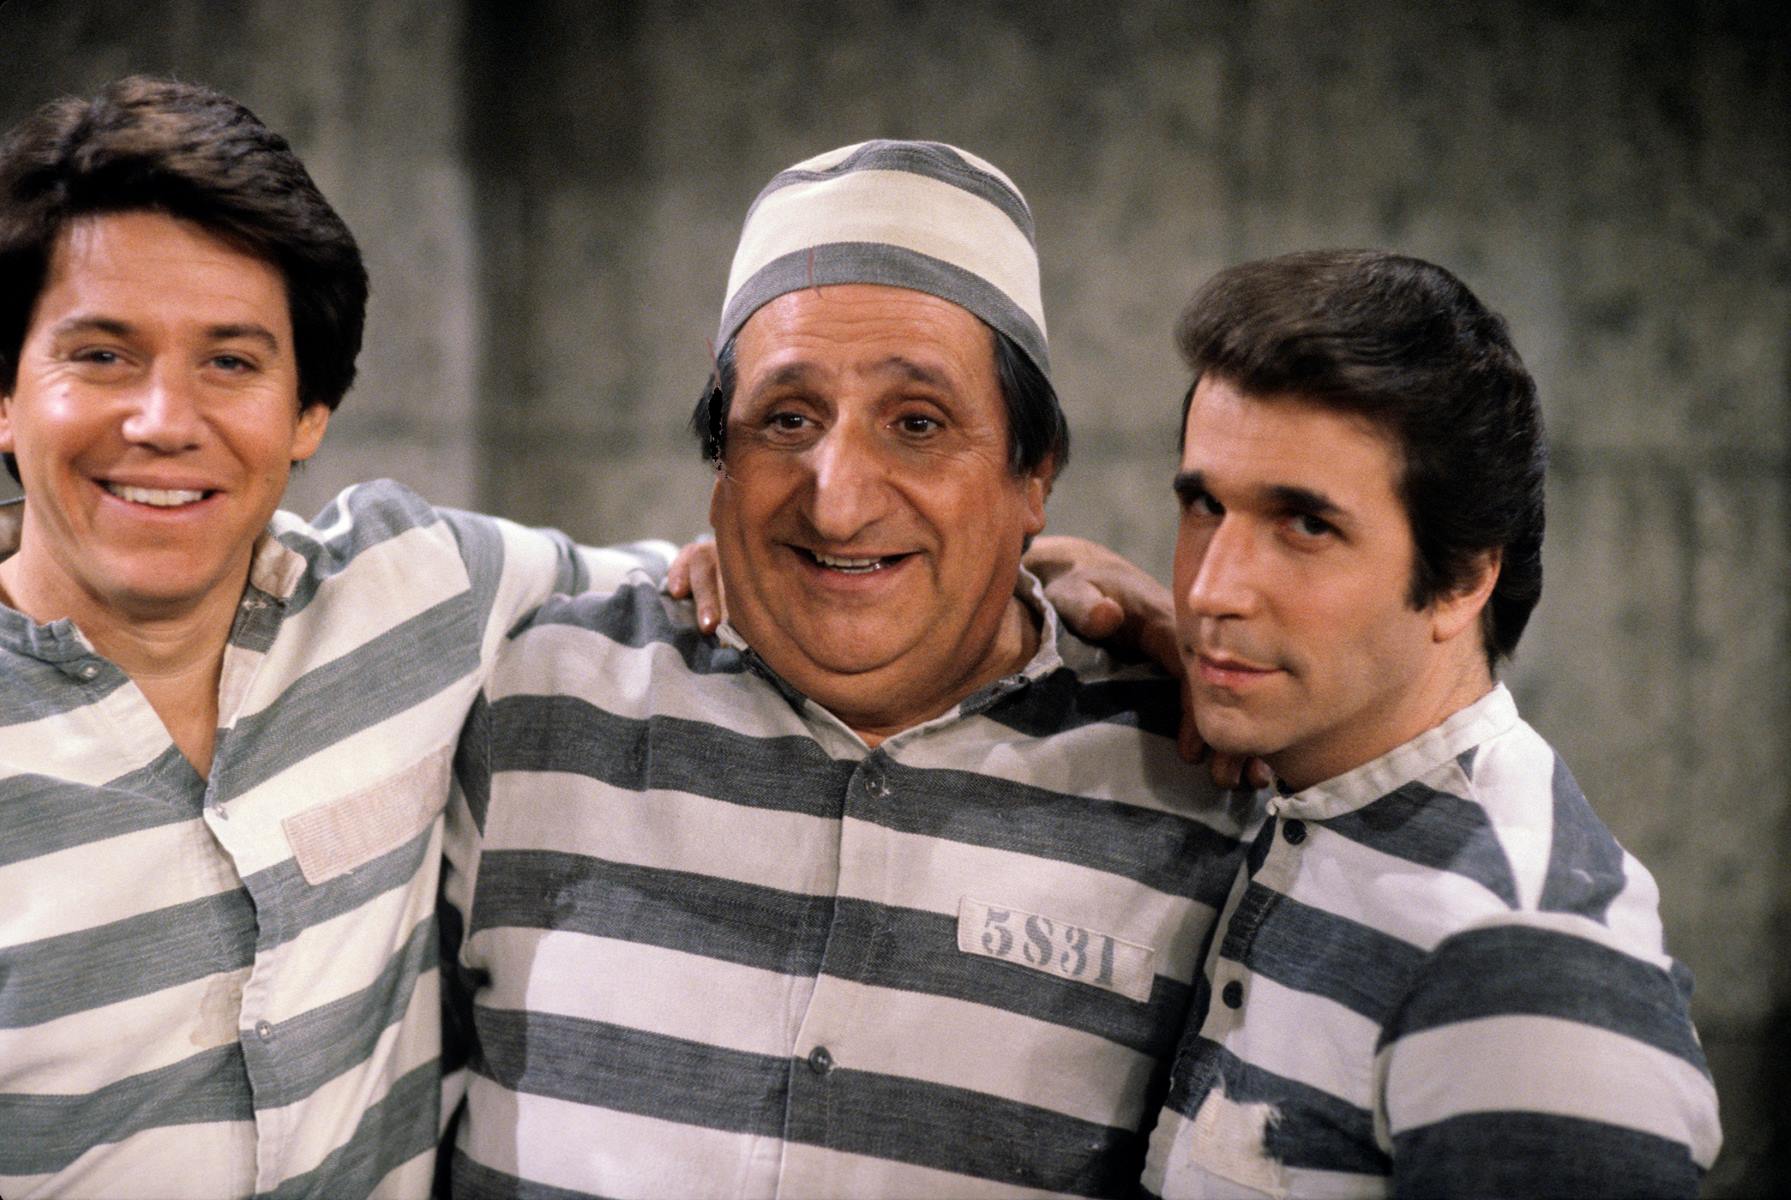 14-mind-blowing-facts-about-al-molinaro